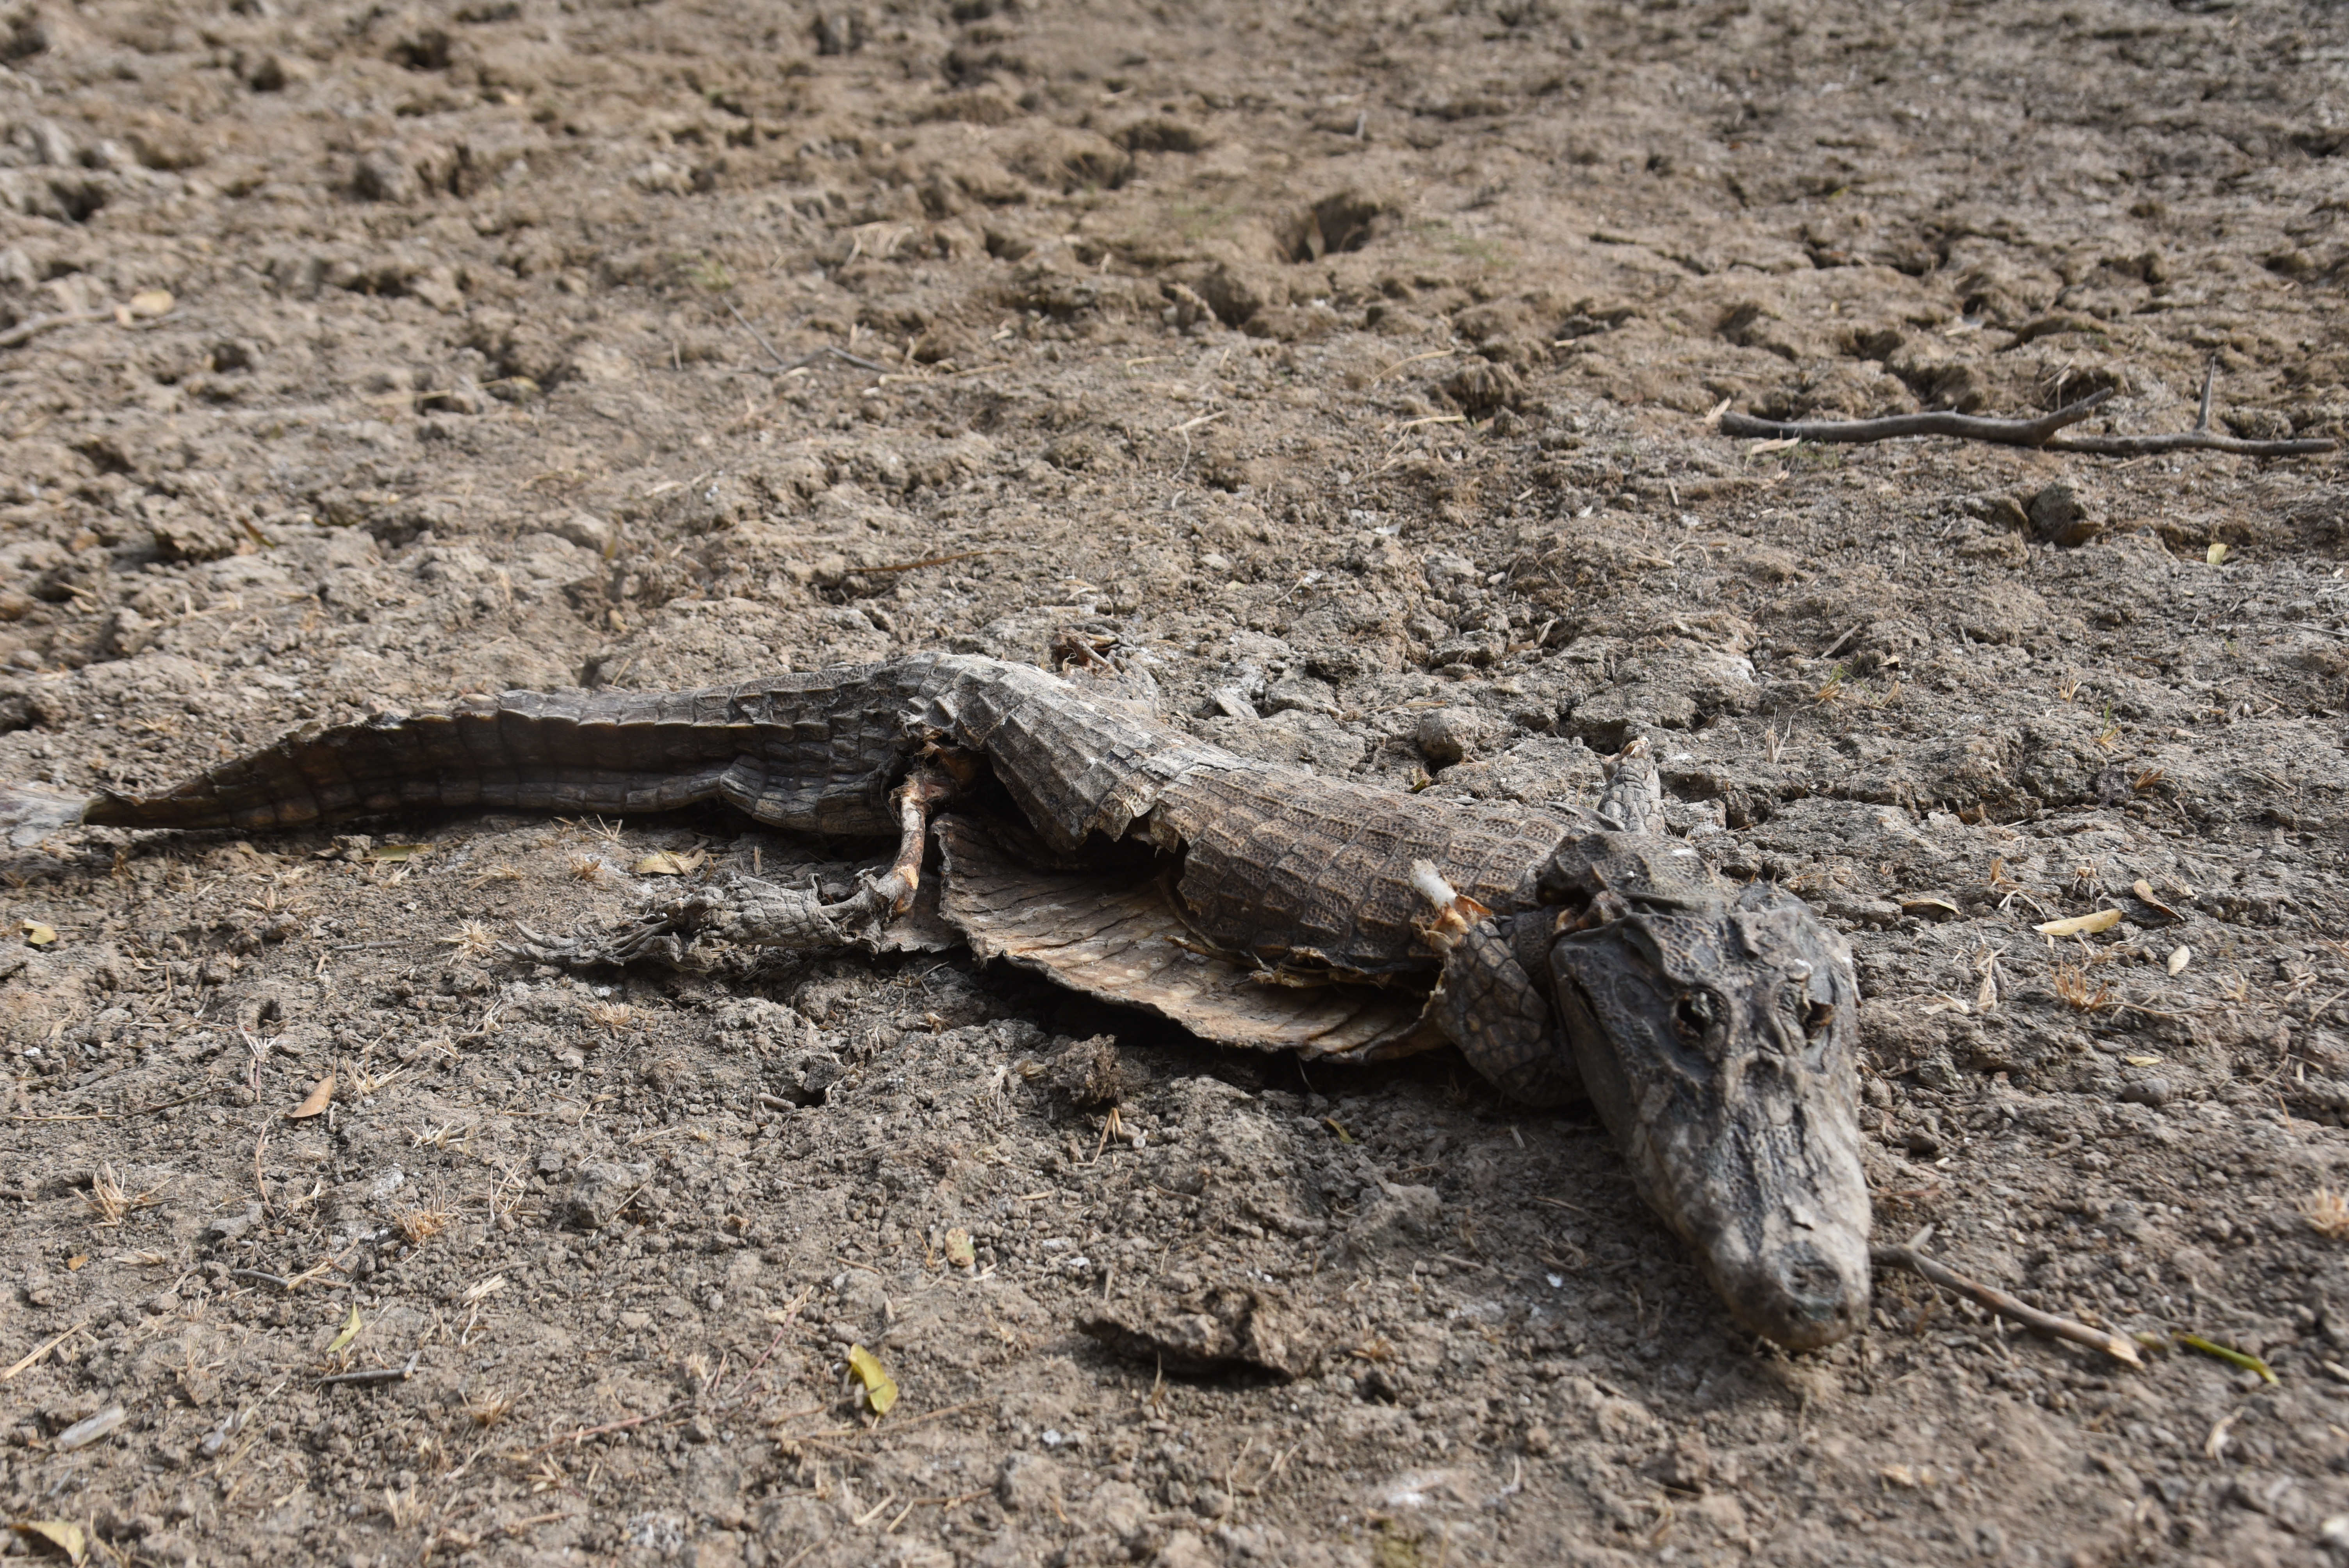 A dead caiman is seen in a pond that is not receiving water from the Pilcomayo river on the border between Paraguay and Argentina, in General Diaz, Paraguay on June 24, 2016.  the area is facing its worst drought in almost two decades. / AFP PHOTO / NORBERTO DUARTE